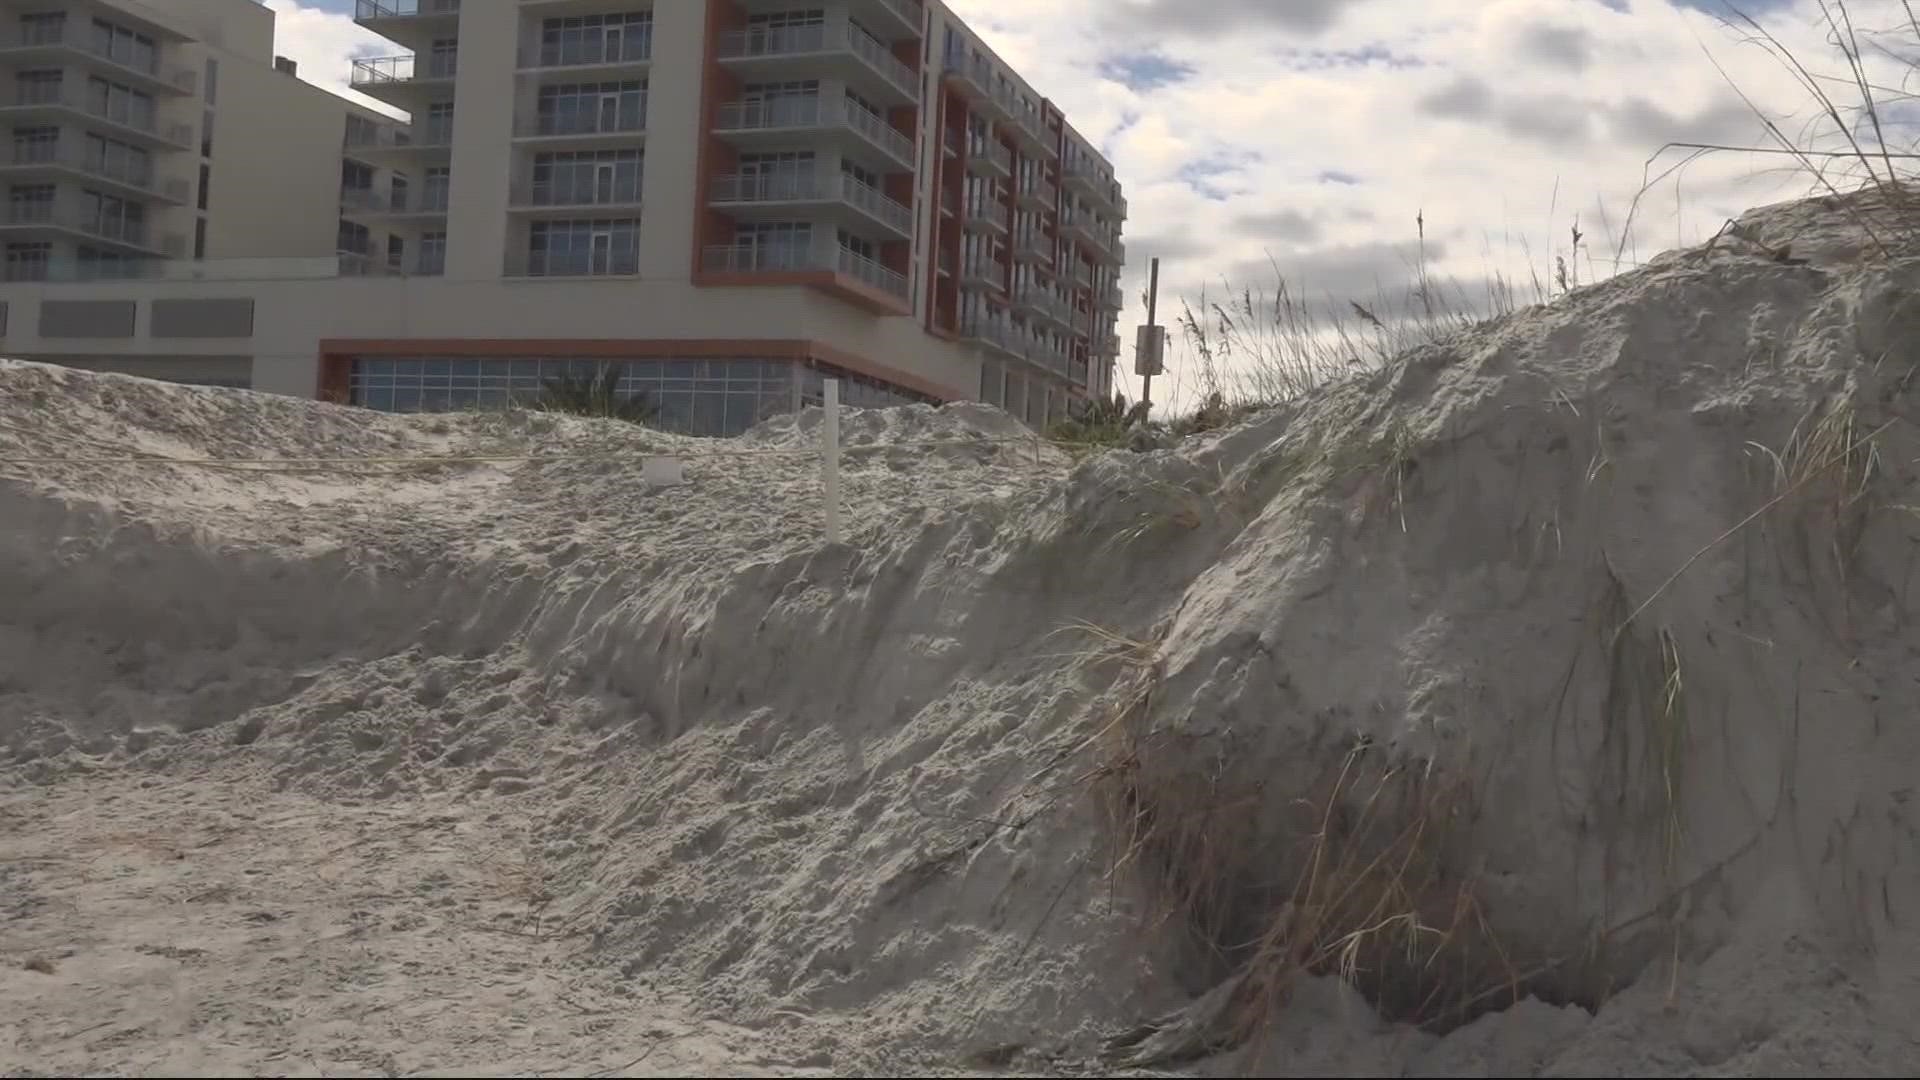 Officials warning resident to be careful, despite beaches reopening and to not stand on dunes following Hurricane Ian.